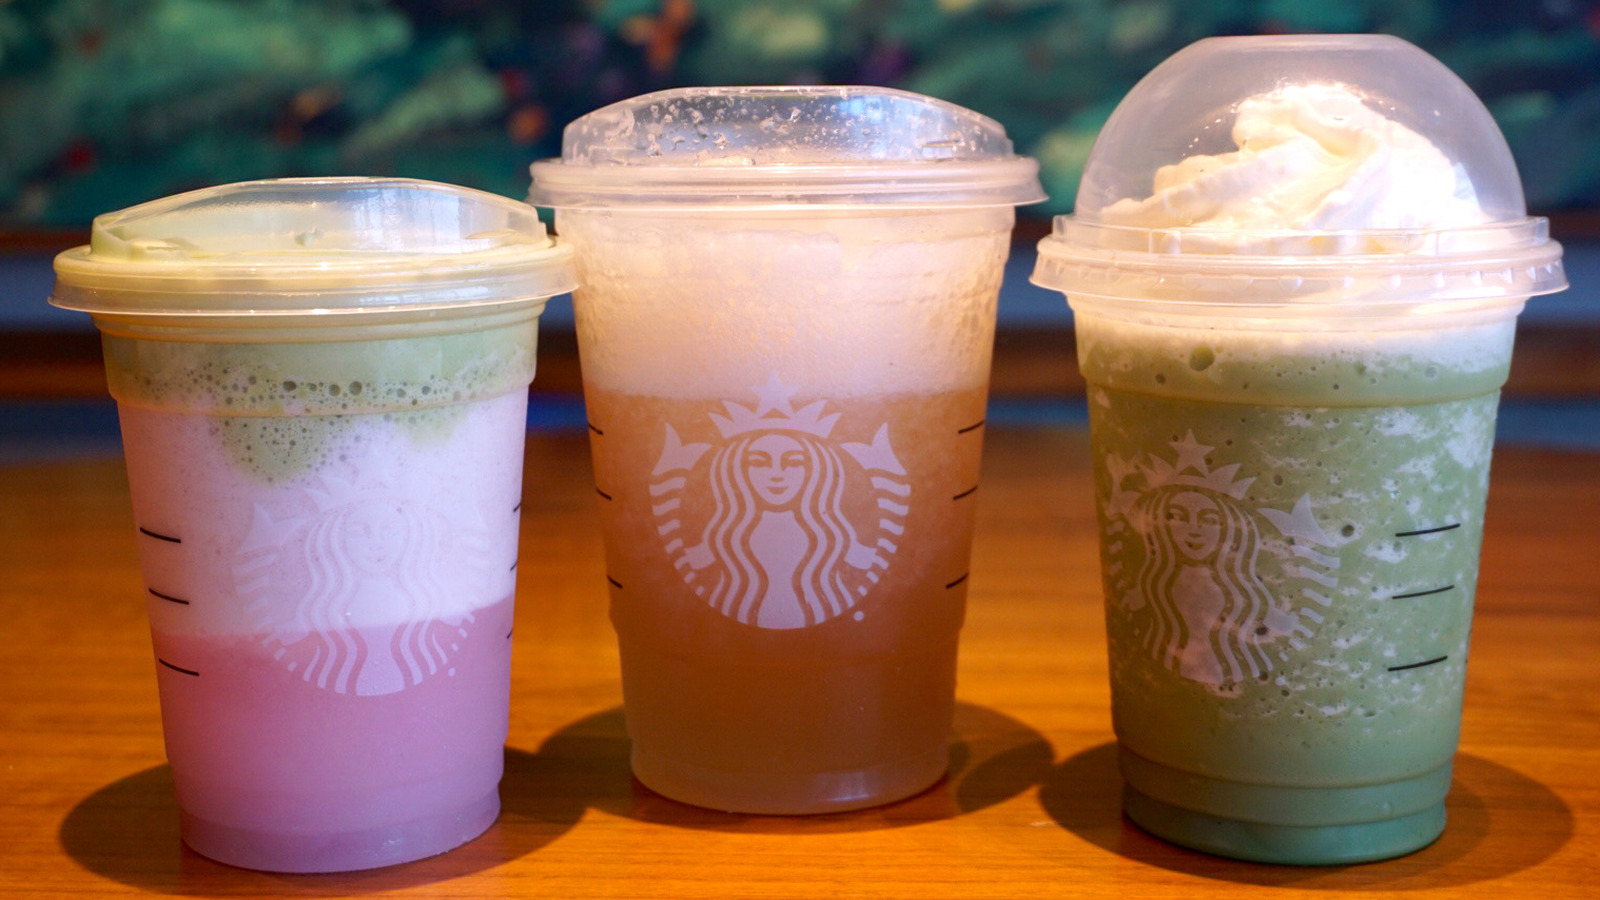 How to Order a Smoothie at Starbucks?